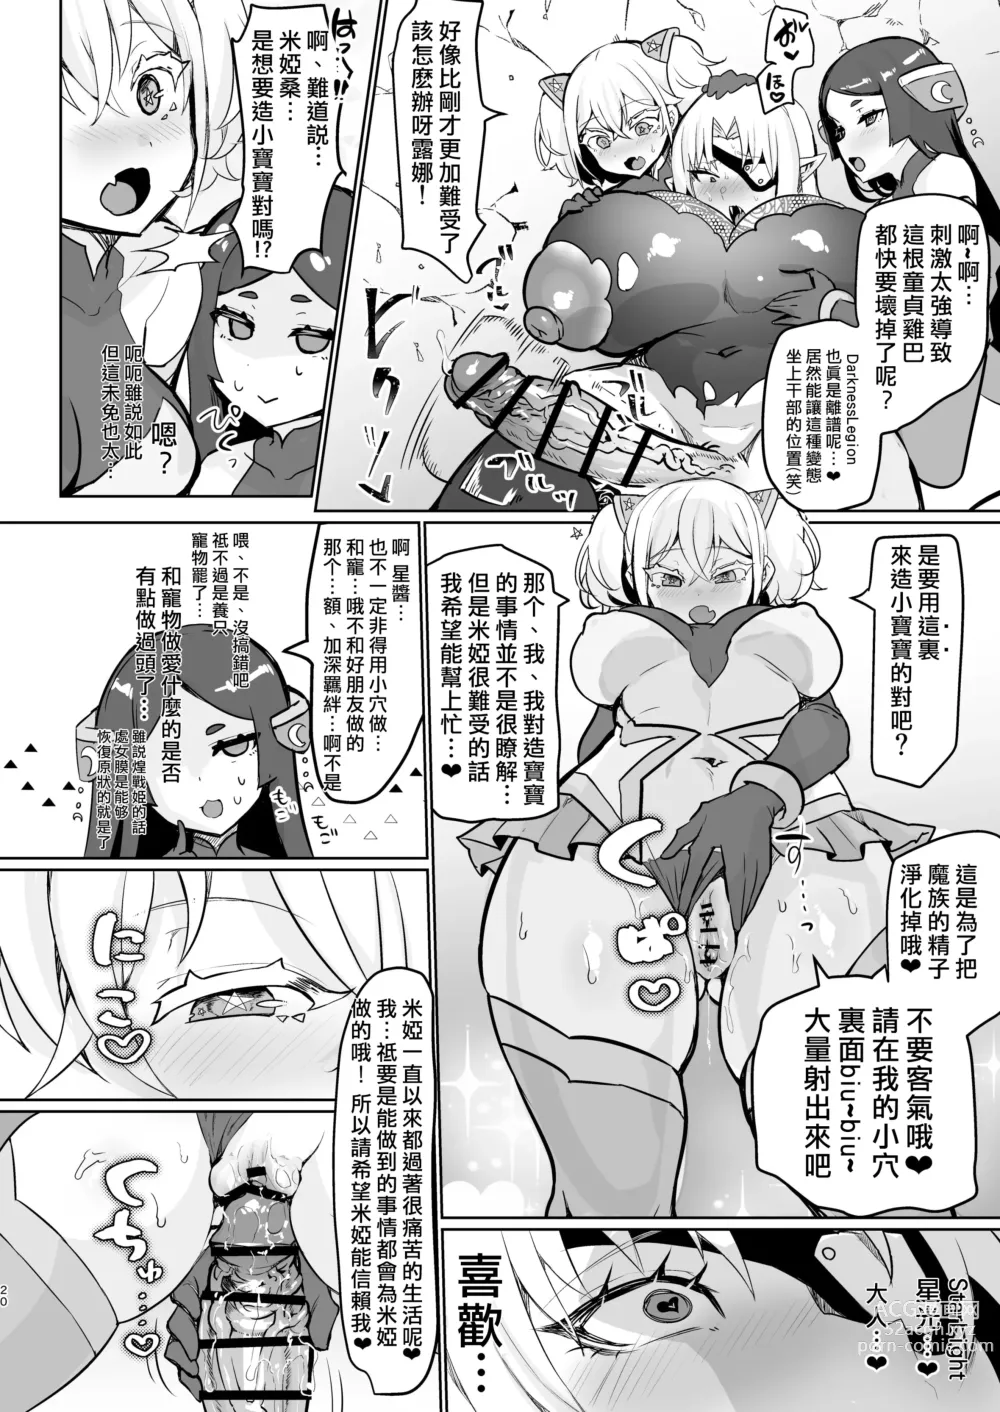 Page 20 of doujinshi 邪恶组织女干部正堕